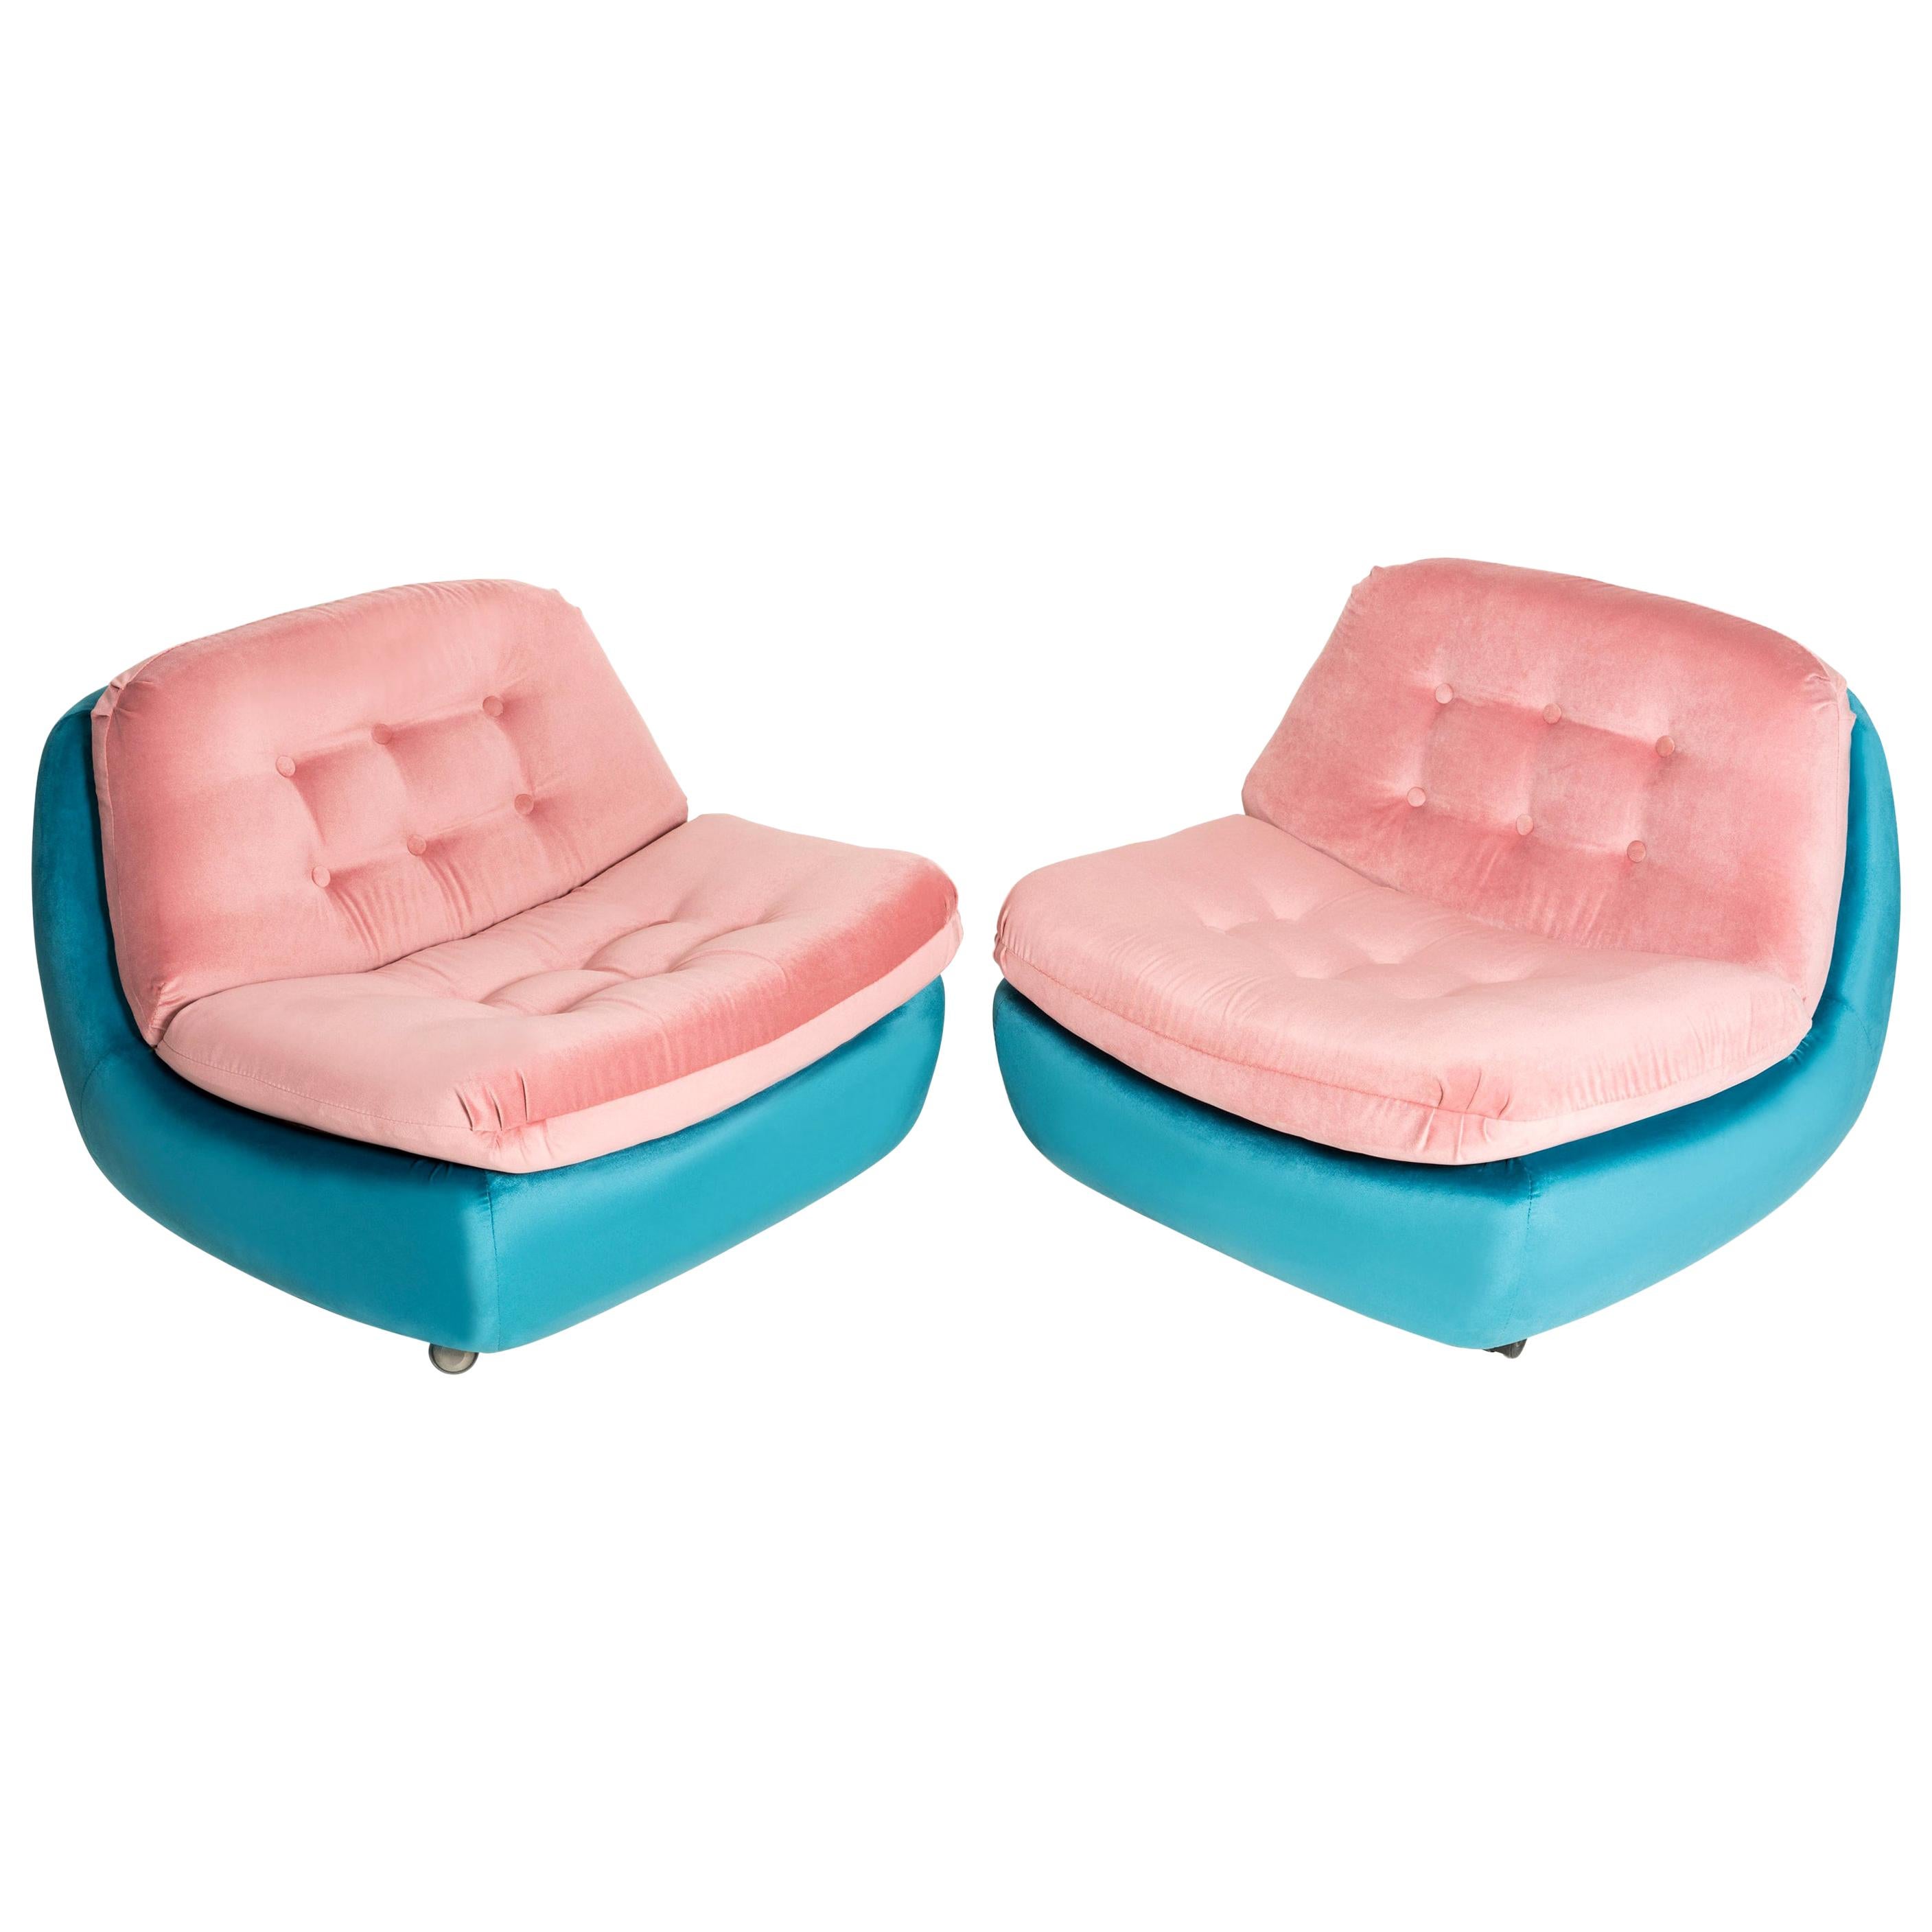 Two 20th Century Vintage Pink and Blue Atlantis Armchairs, 1960s For Sale